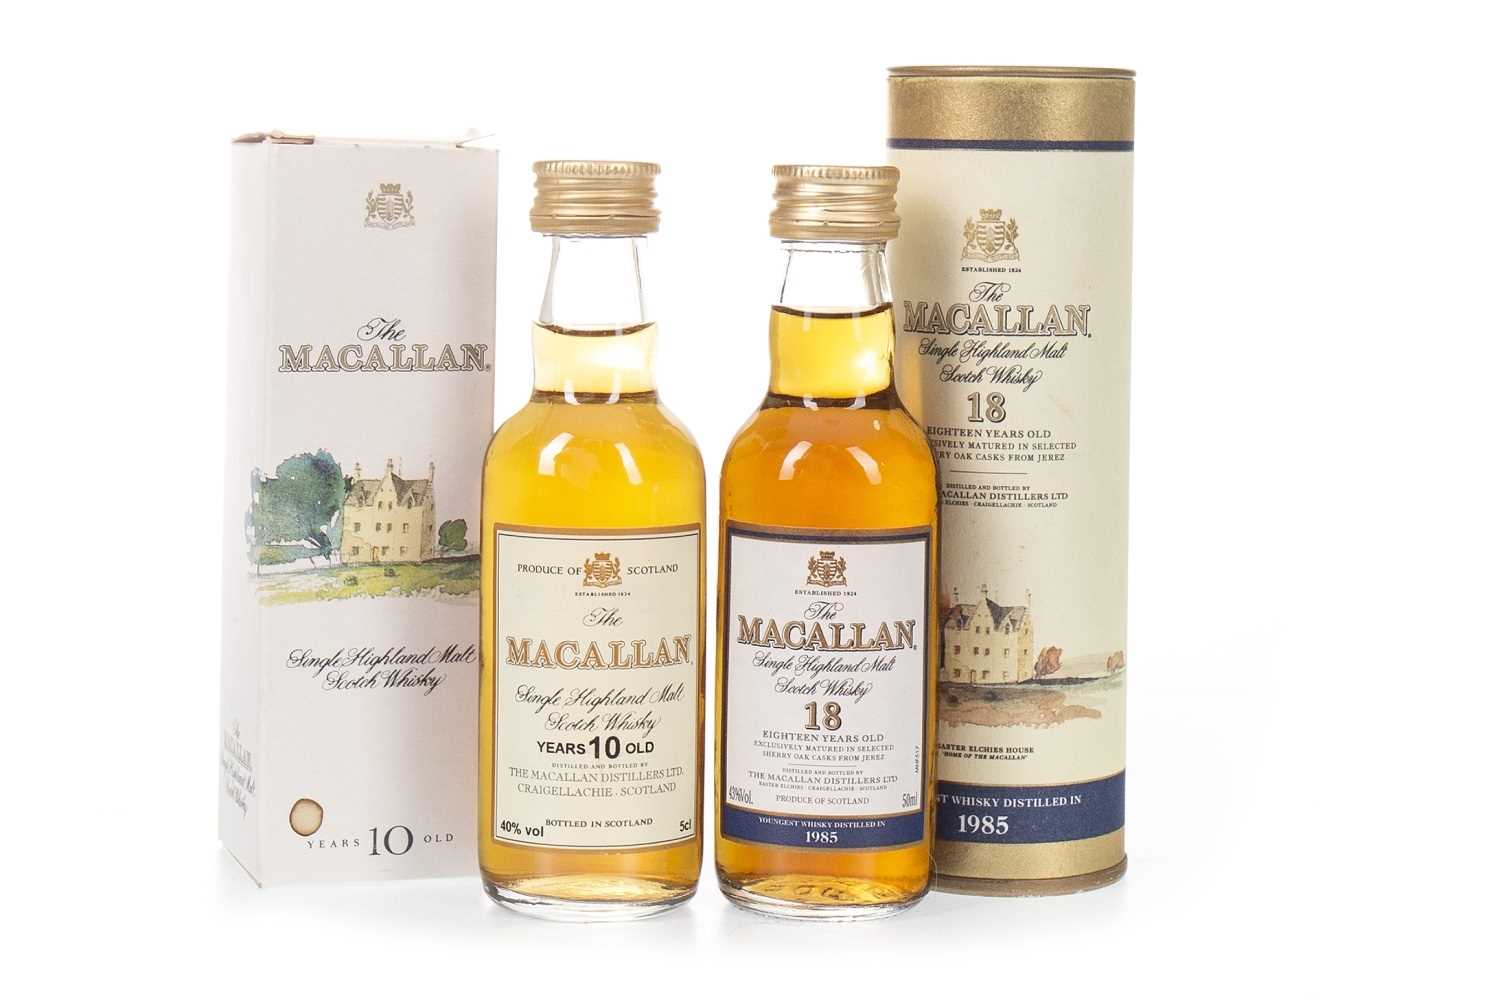 Macallan 1985 18 Years Old Miniature Auctions Price Archive